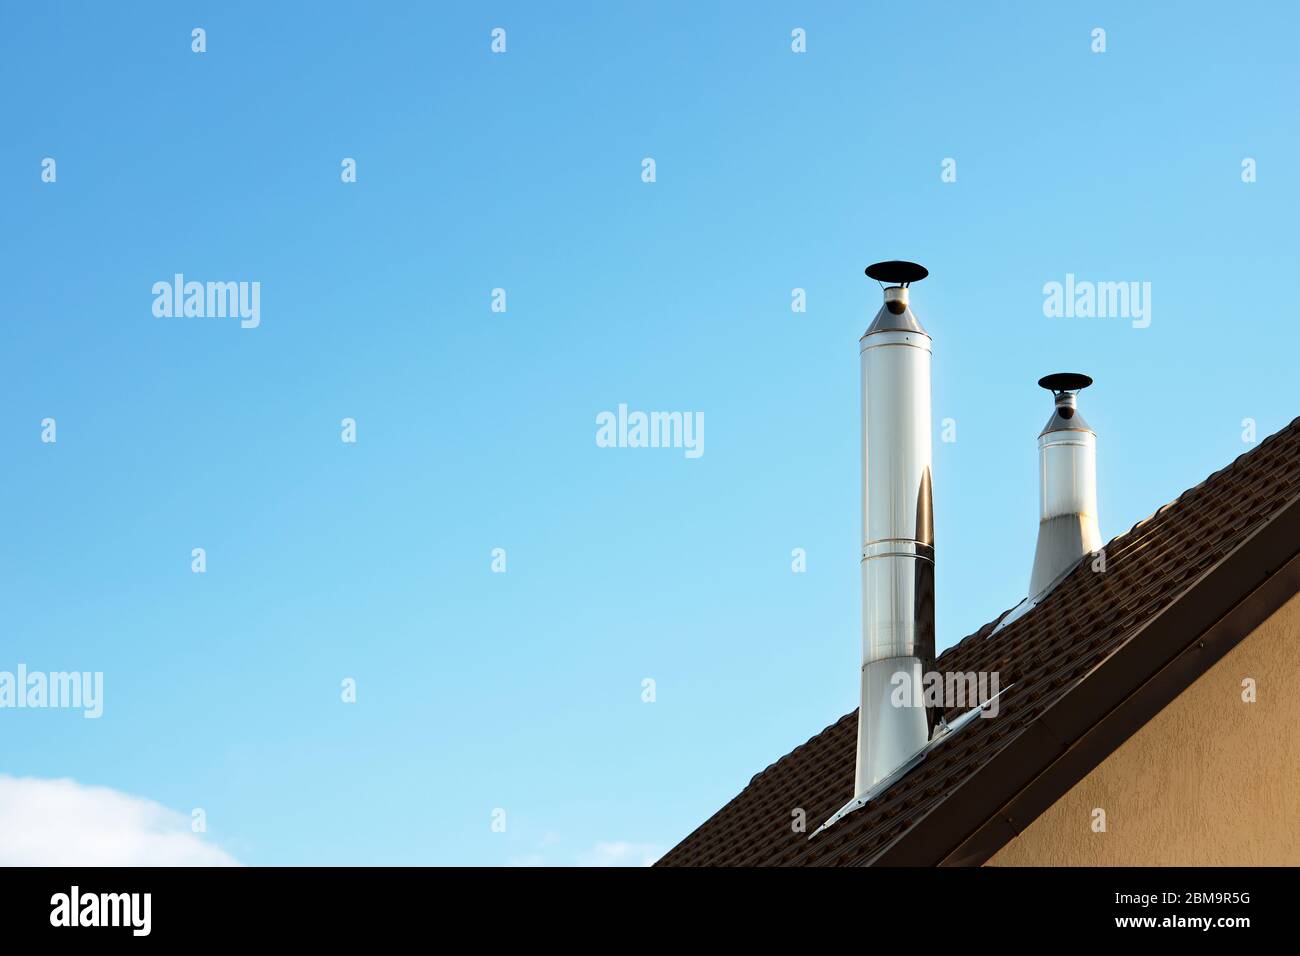 Two modern style chimneys from oven and fireplace stacked stainless steel on tiled roof made according to fire safety requirements, and to avoid conde Stock Photo